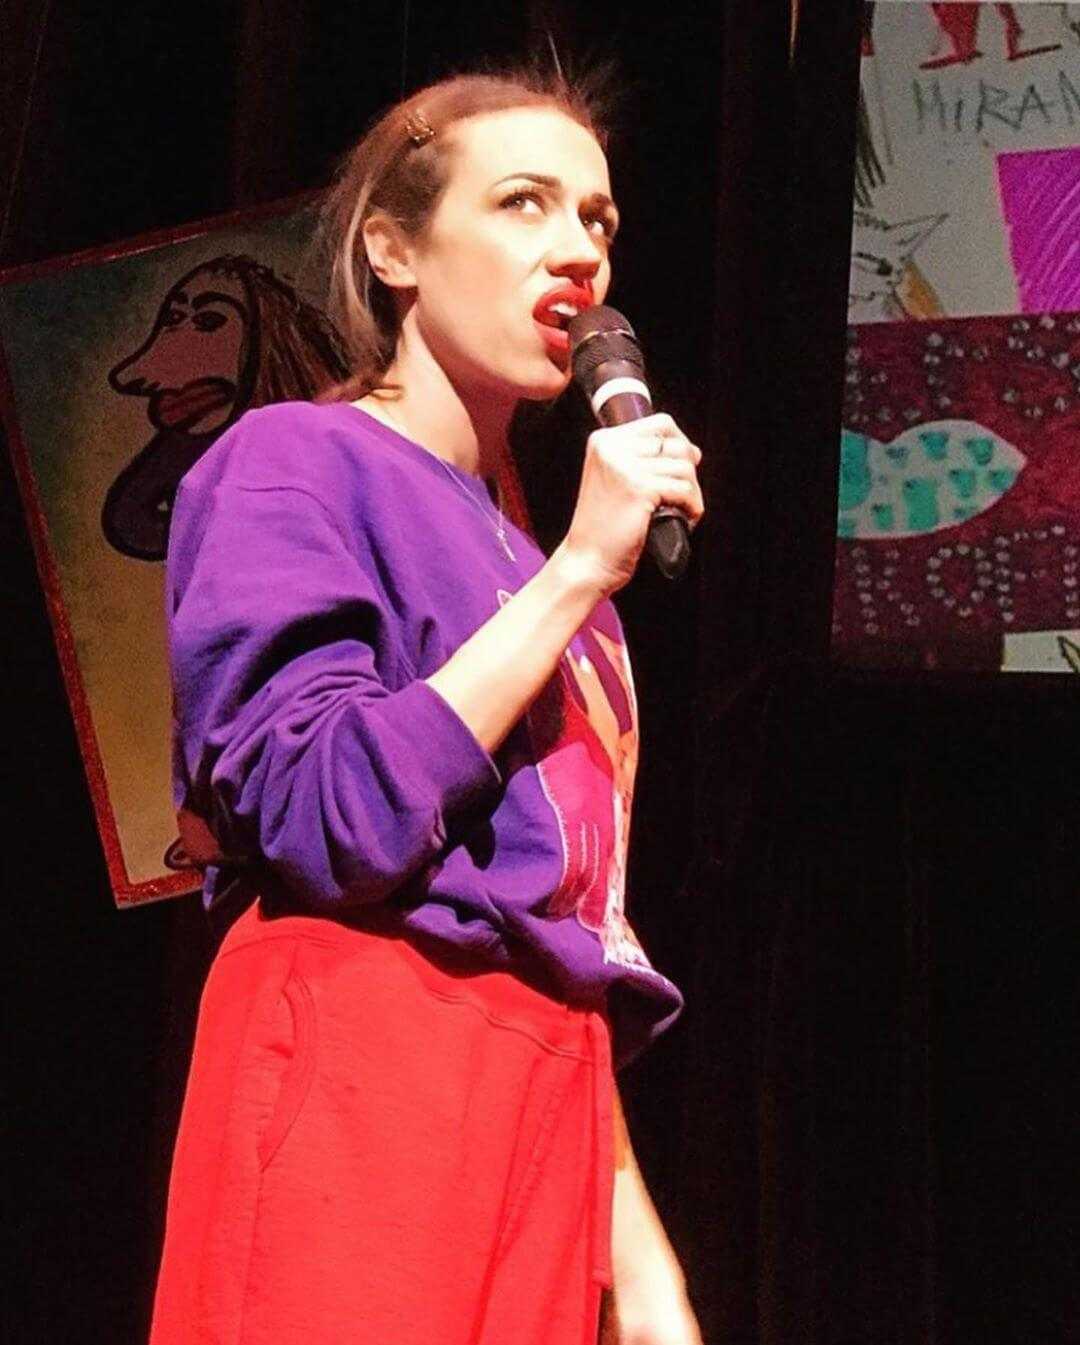 51 Hottest Colleen Ballinger Big Butt Pictures That Will Make You Begin To Look All Starry Eyed At Her 8